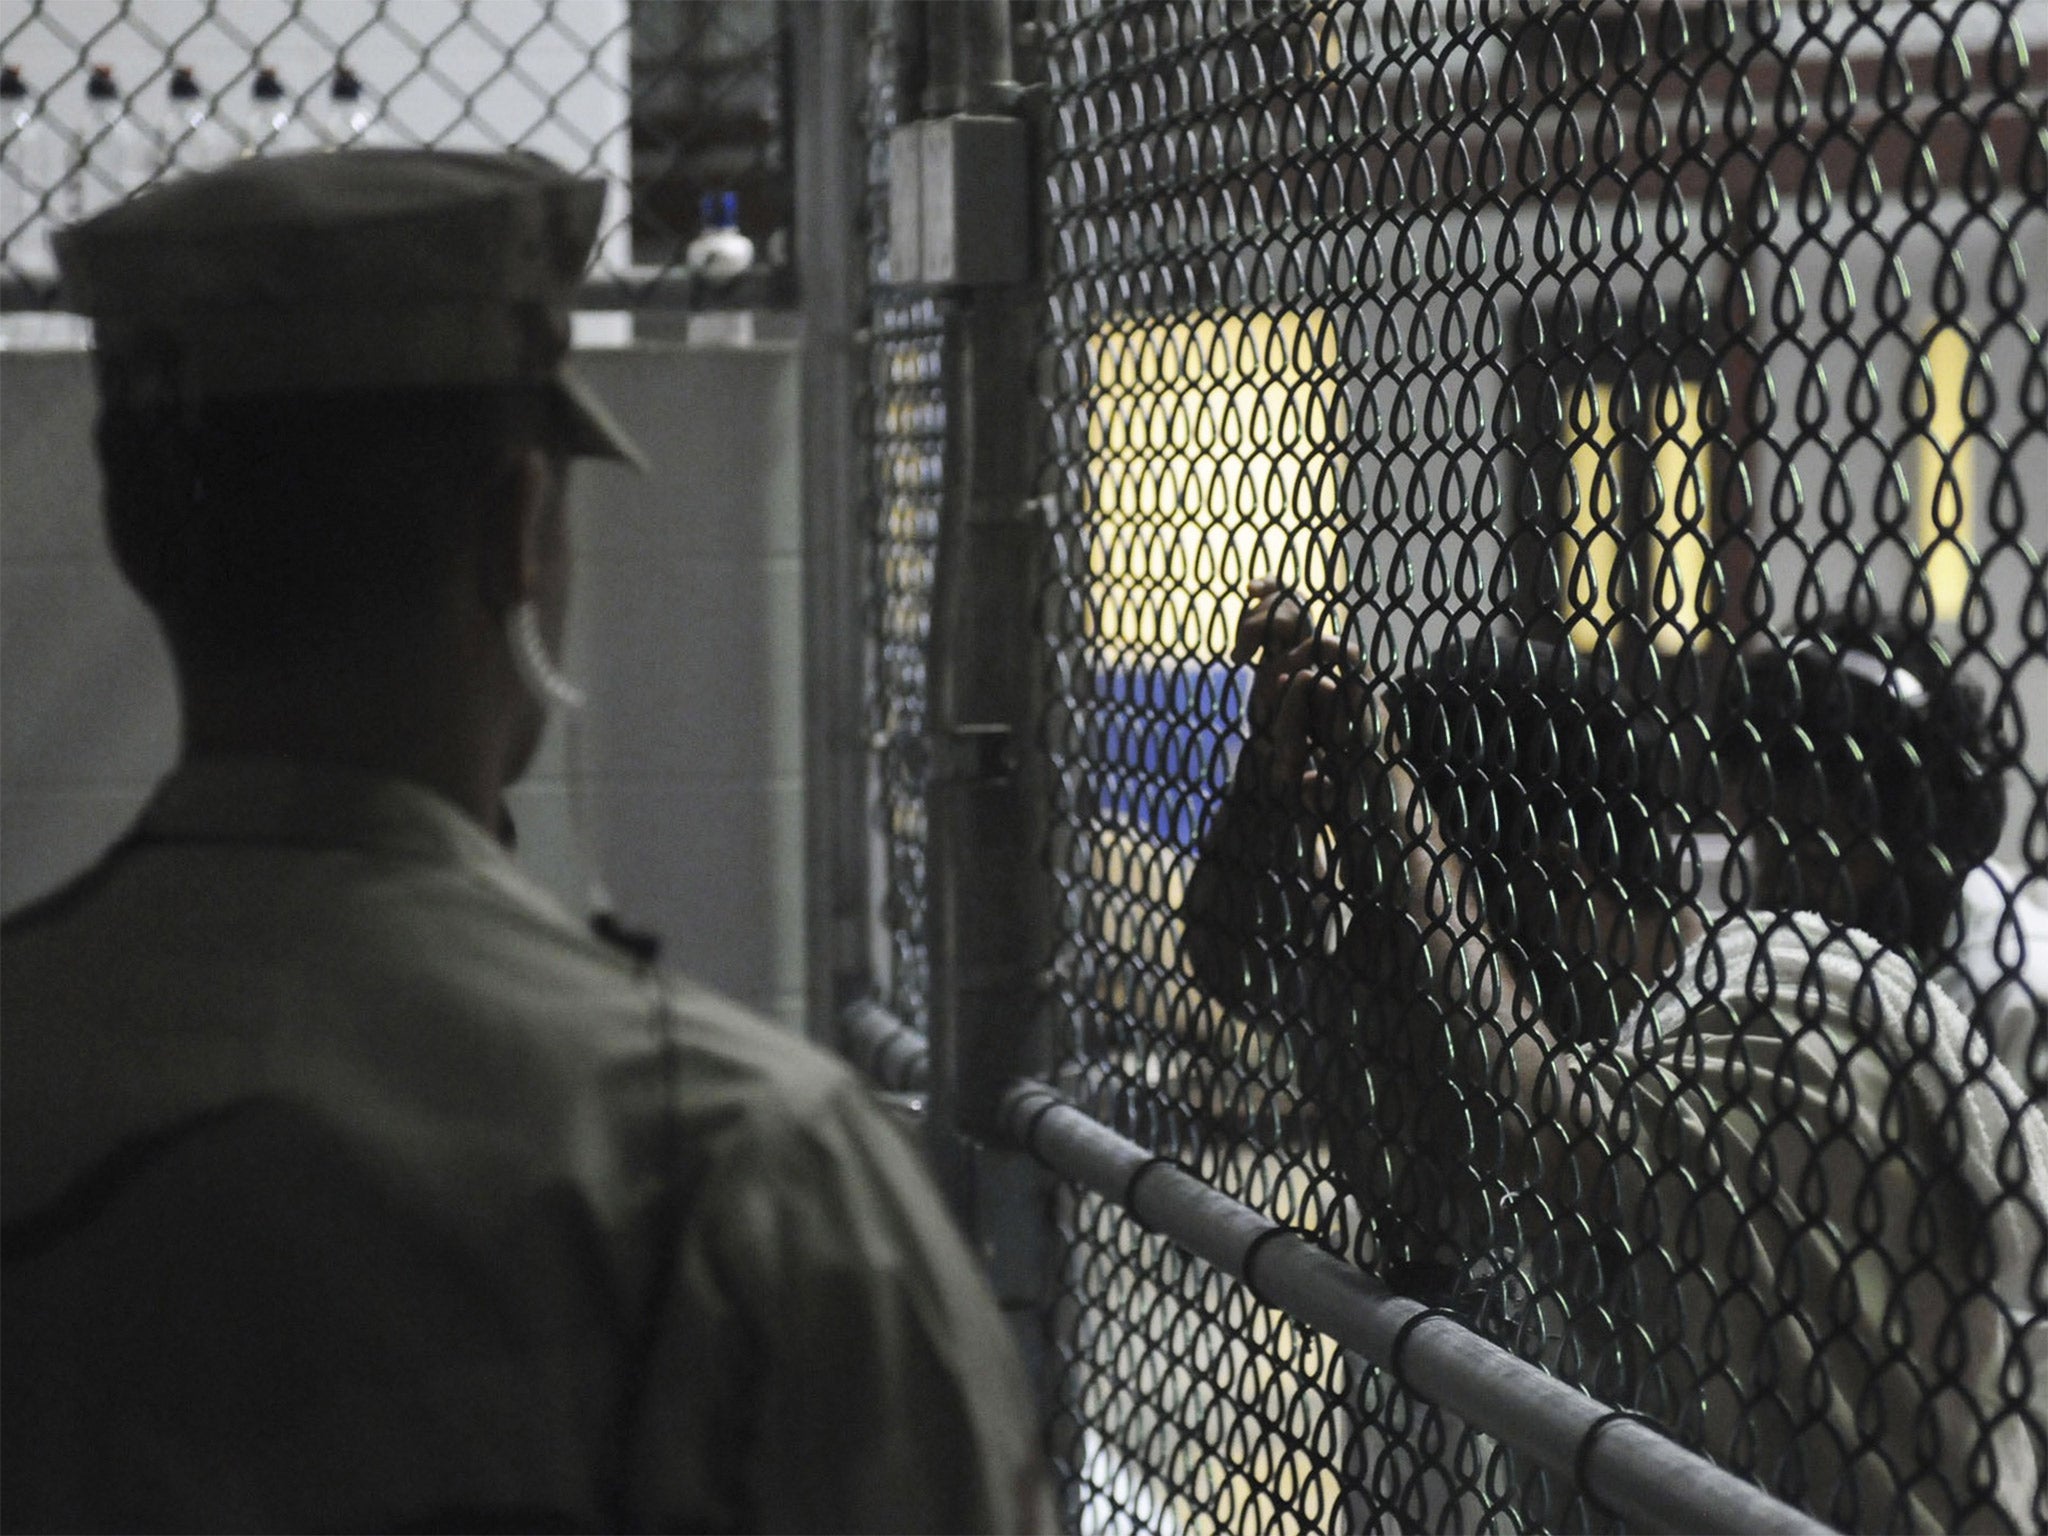 &#13;
A guard watches over detainees in a cell block at Guantanamo Bay &#13;